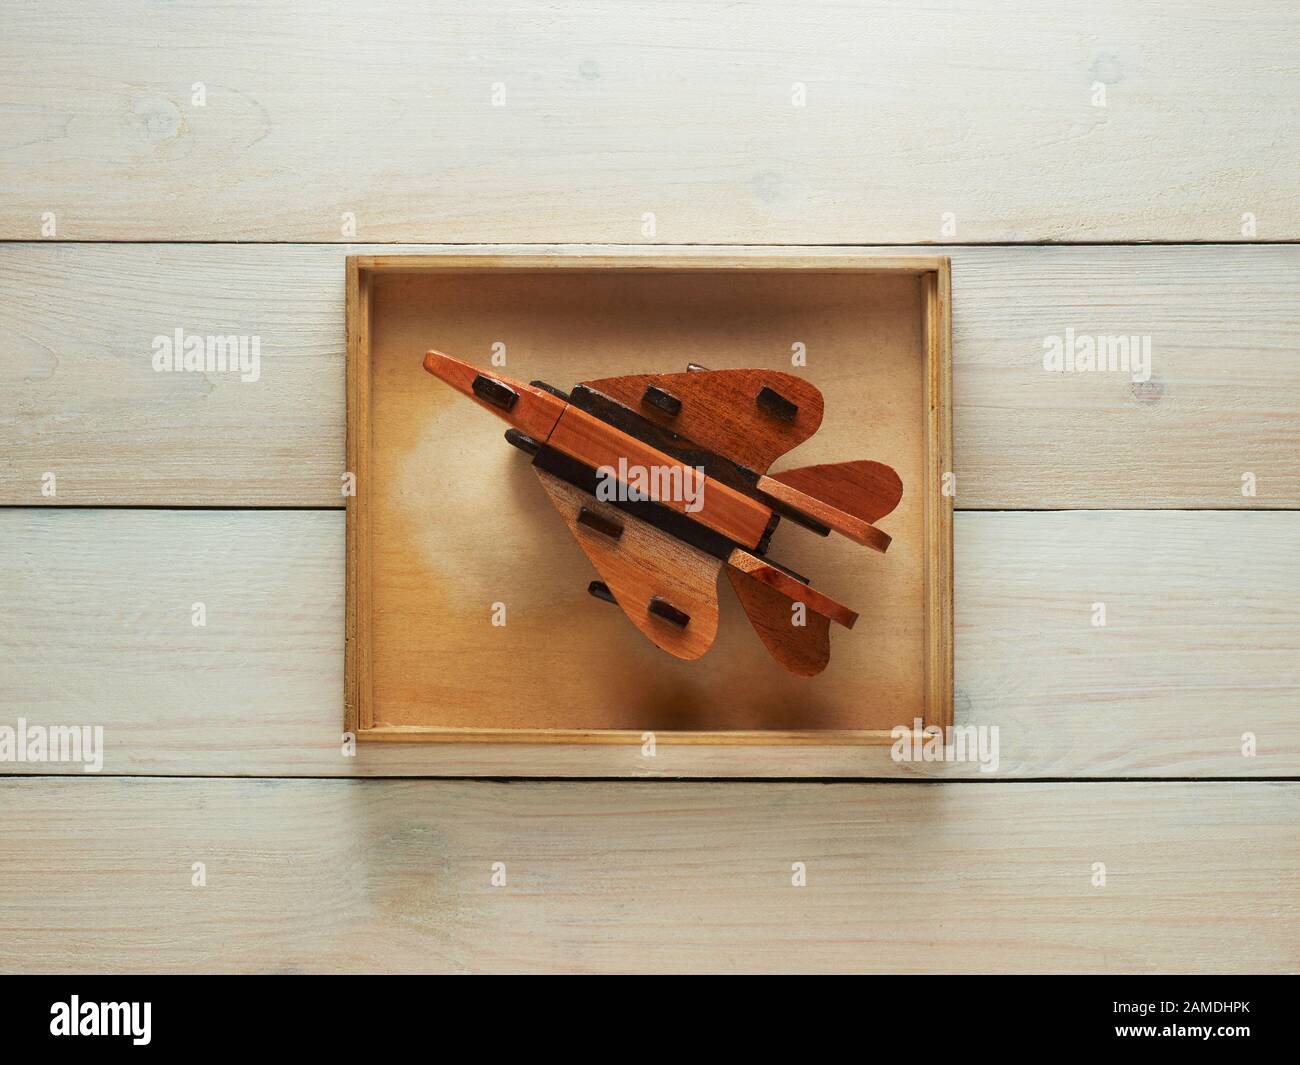 Wooden toy jet plane in a wooden box with a wooden background Stock Photo